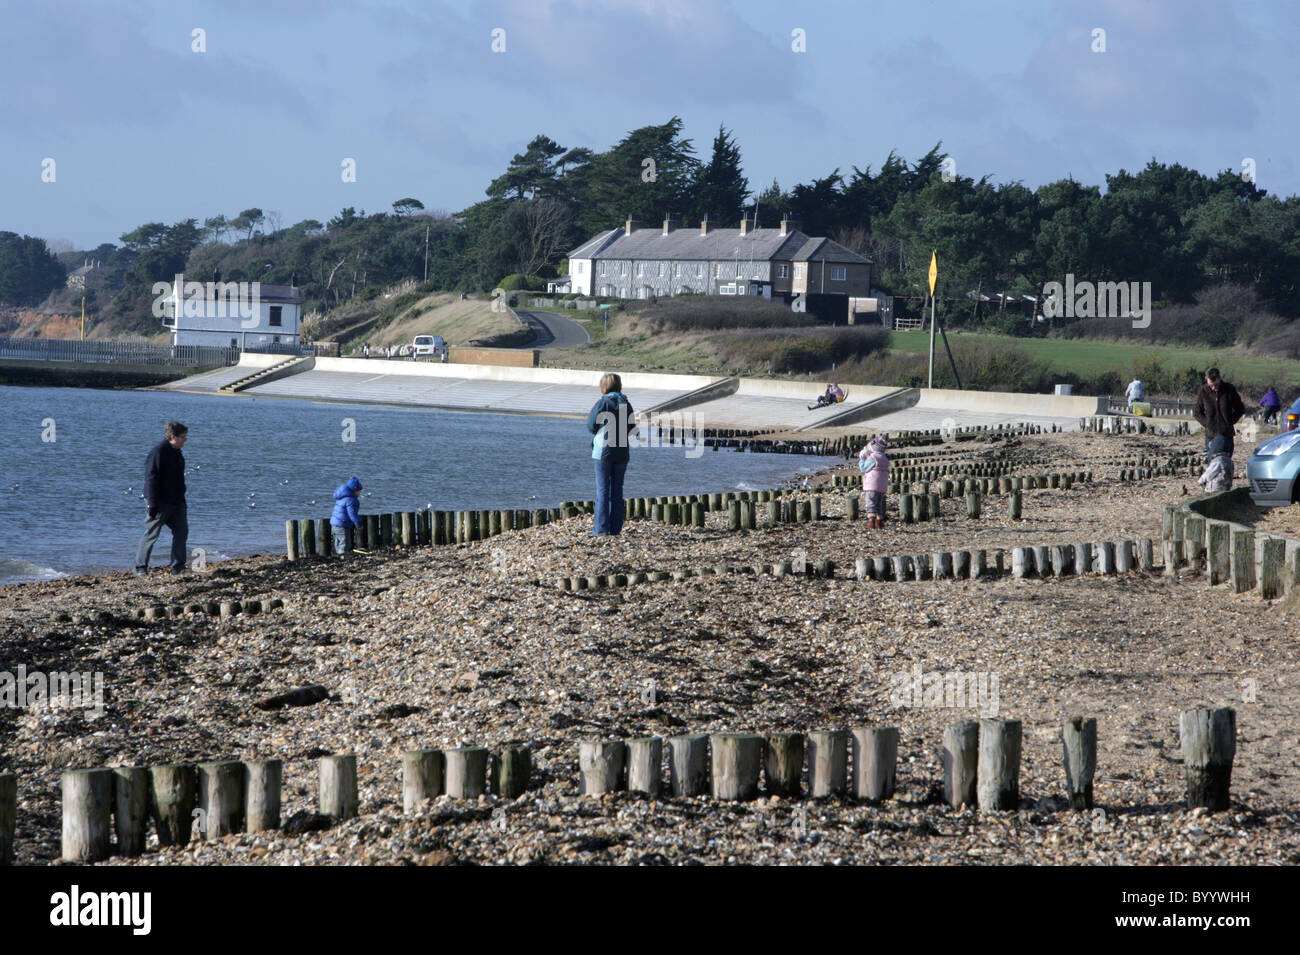 Bright sunny day on the beach at Lepe, edge of the New Forest Hampshire UK. New Forest National Park. Stock Photo